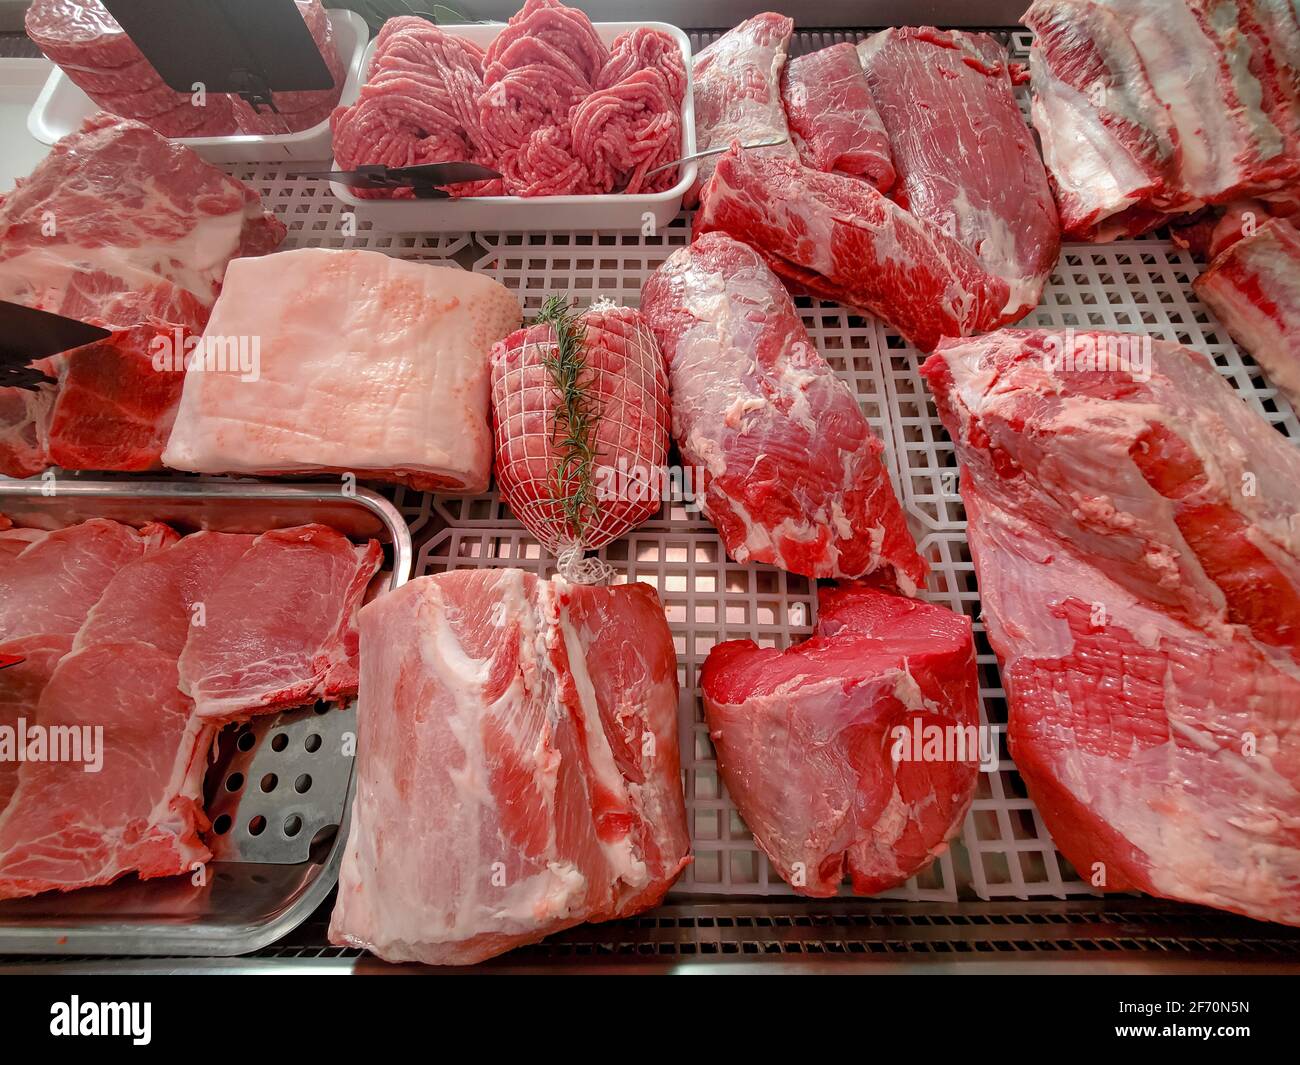 Variety of Meat exposition on butcher shop,food industry,animal products consumerism Stock Photo